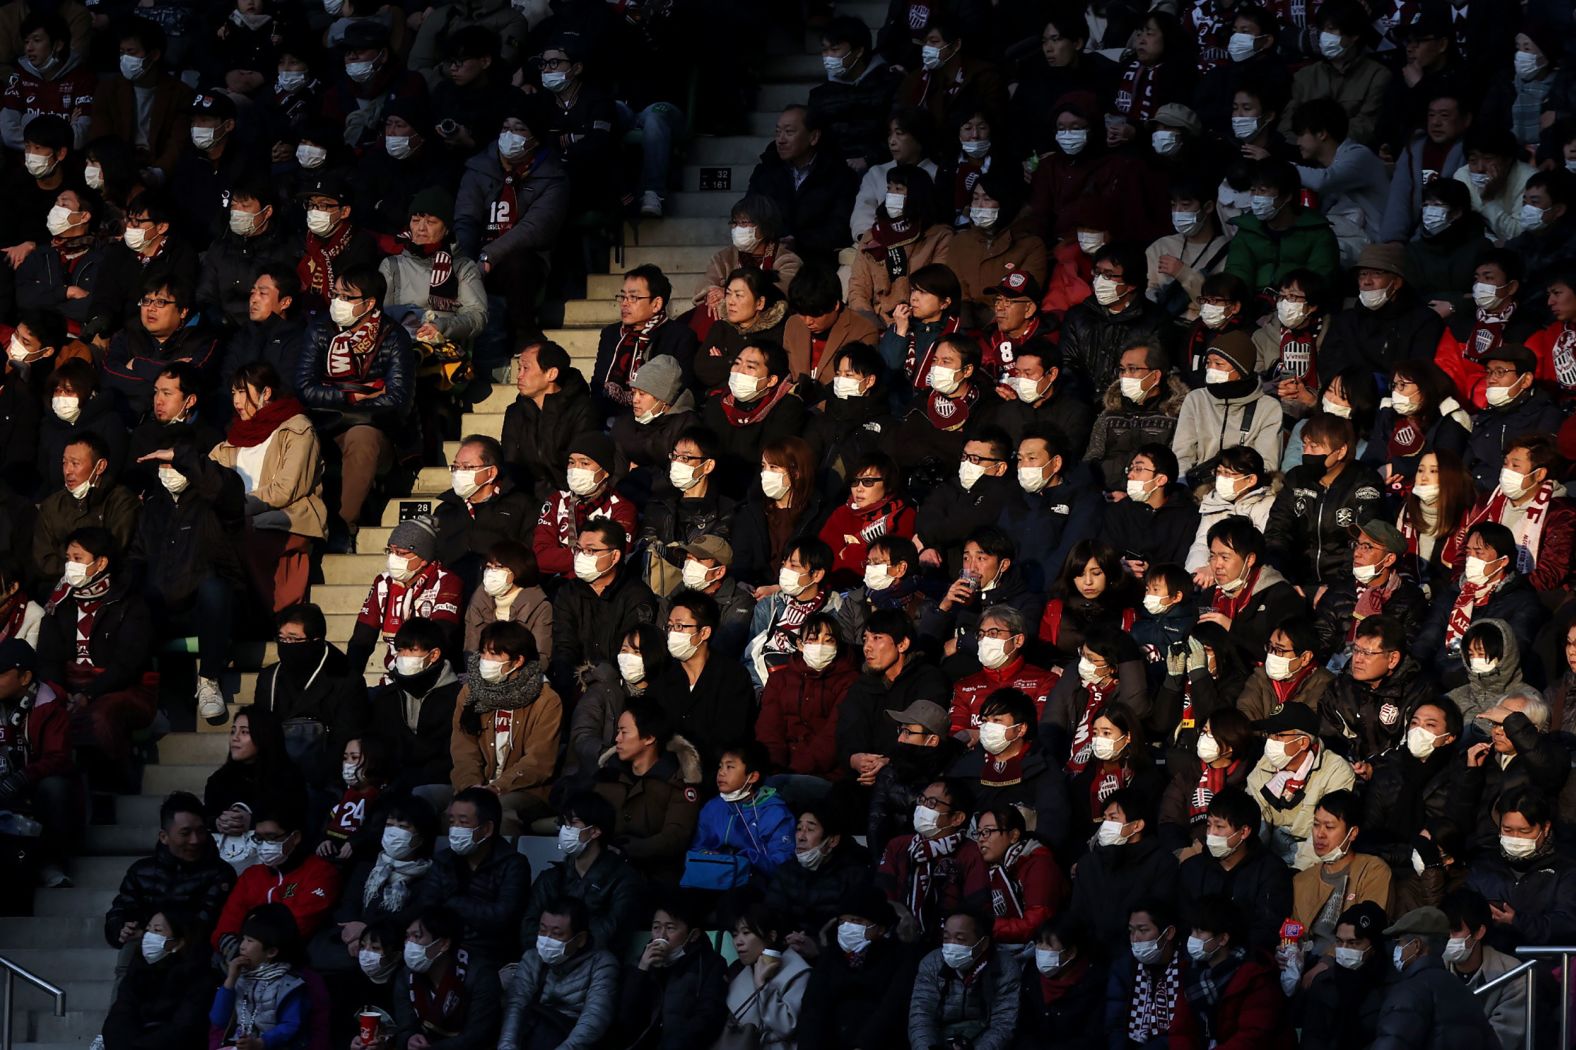 People attend a professional soccer match in Kobe, Japan, on February 23, 2020. To help stop the spread of the novel coronavirus, the soccer club Vissel Kobe <a href="index.php?page=&url=https%3A%2F%2Fwww.espn.com%2Fsoccer%2Fvissel-kobe%2Fstory%2F4057914%2Finiestas-vissel-kobe-ban-singing-chanting-due-to-coronavirus-threat" target="_blank" target="_blank">told fans not to sing, chant or wave flags</a> in the season opener against Yokohama FC.